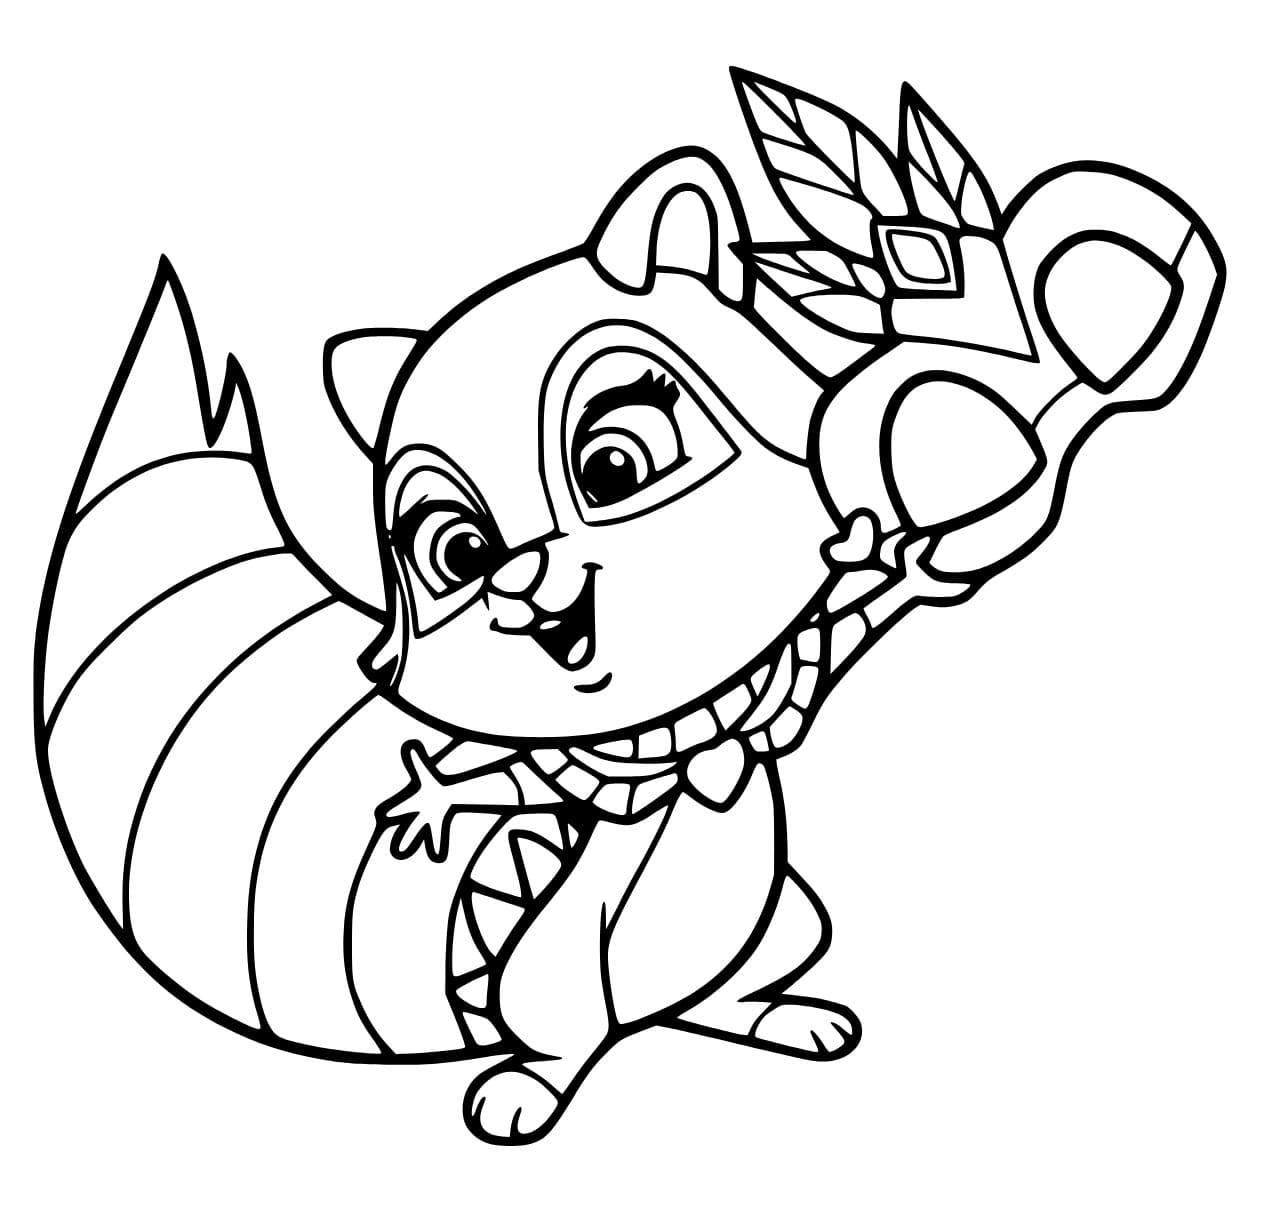 Thistleblossom from palace pets coloring page